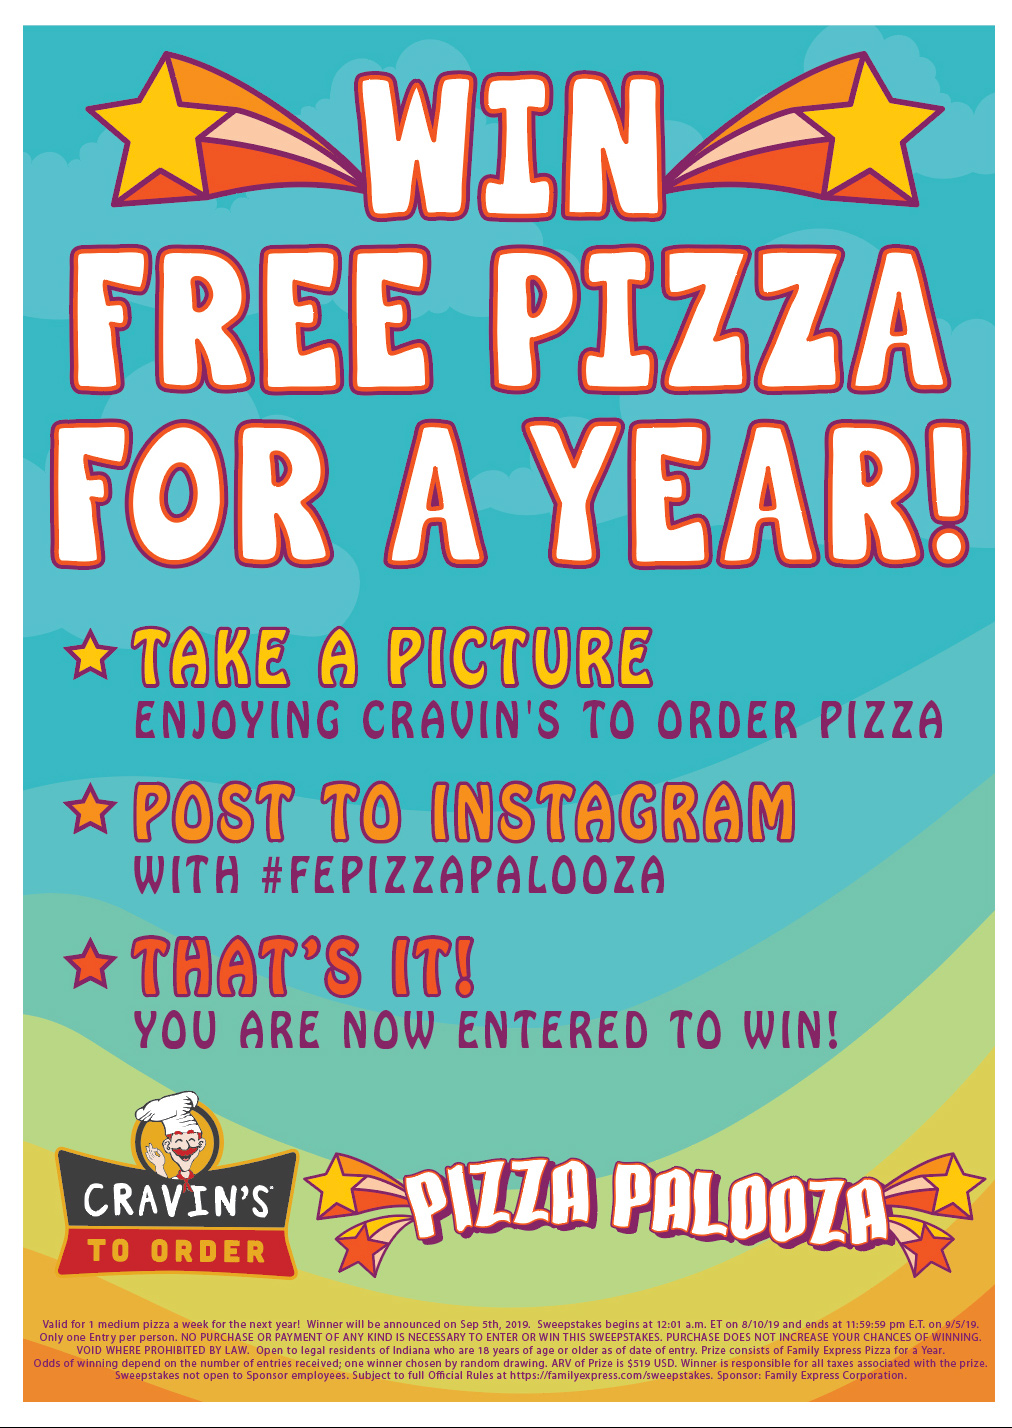 Win Free Pizza For A Year!